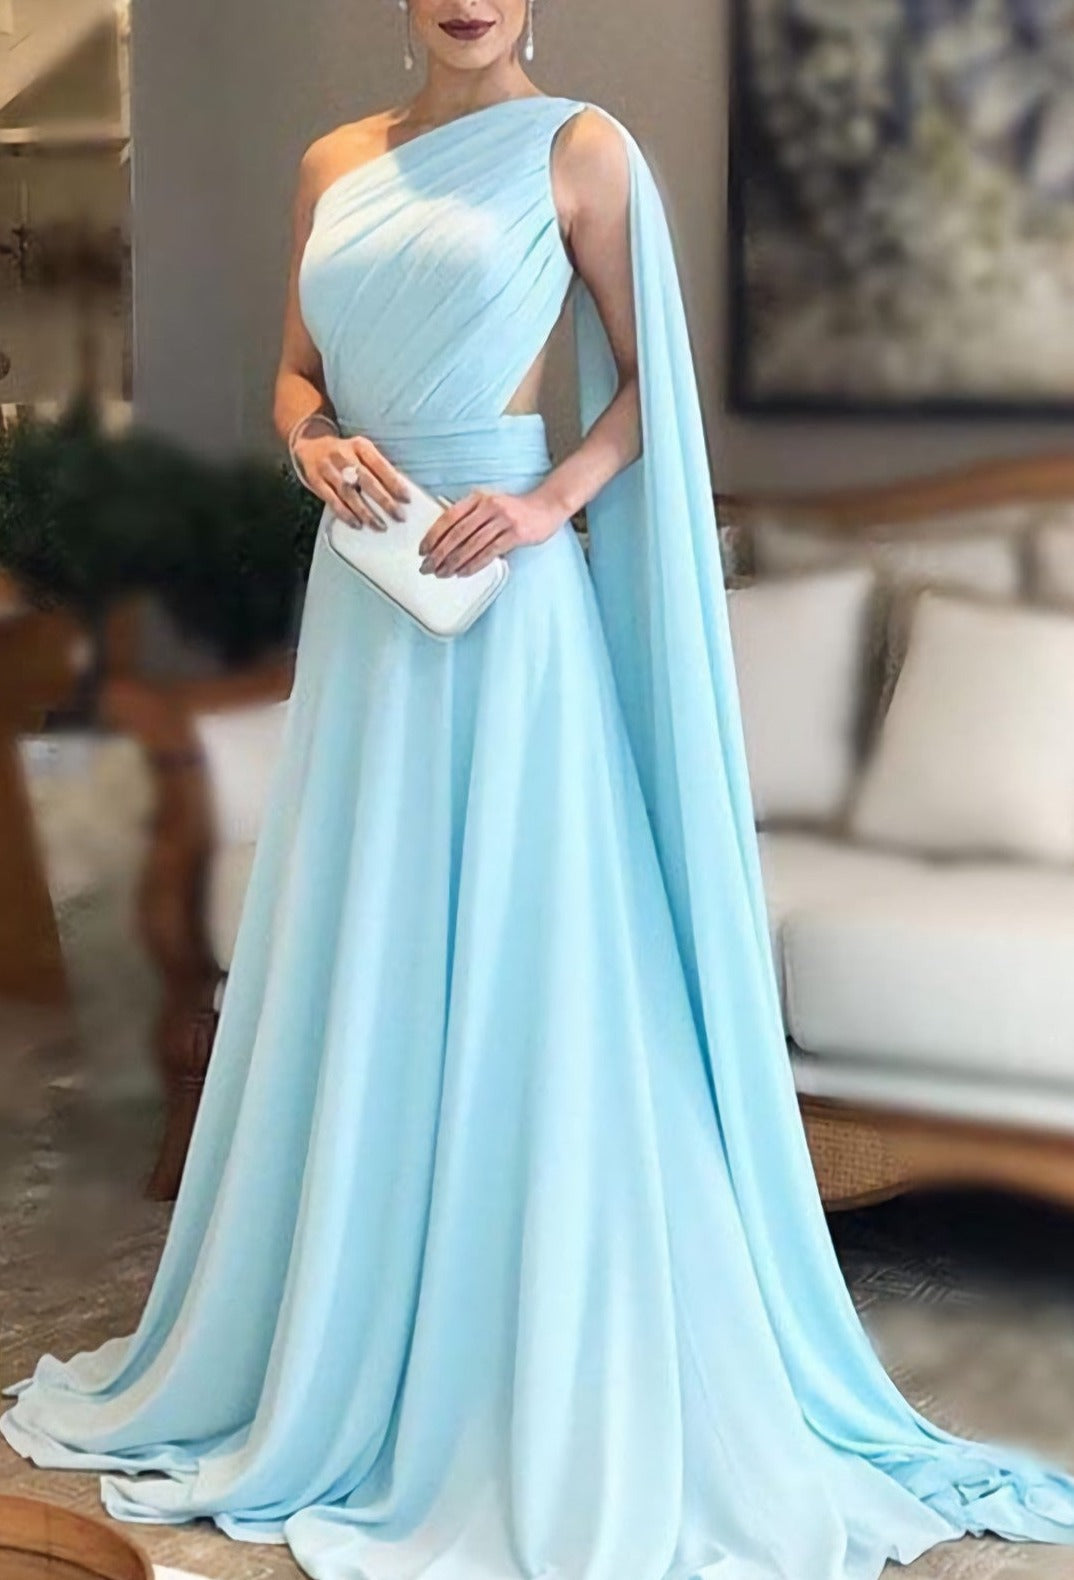 Light Blue One Shoulder Chiffon Formal Dresses Pleats Sheer Illusion Back Prom Gown